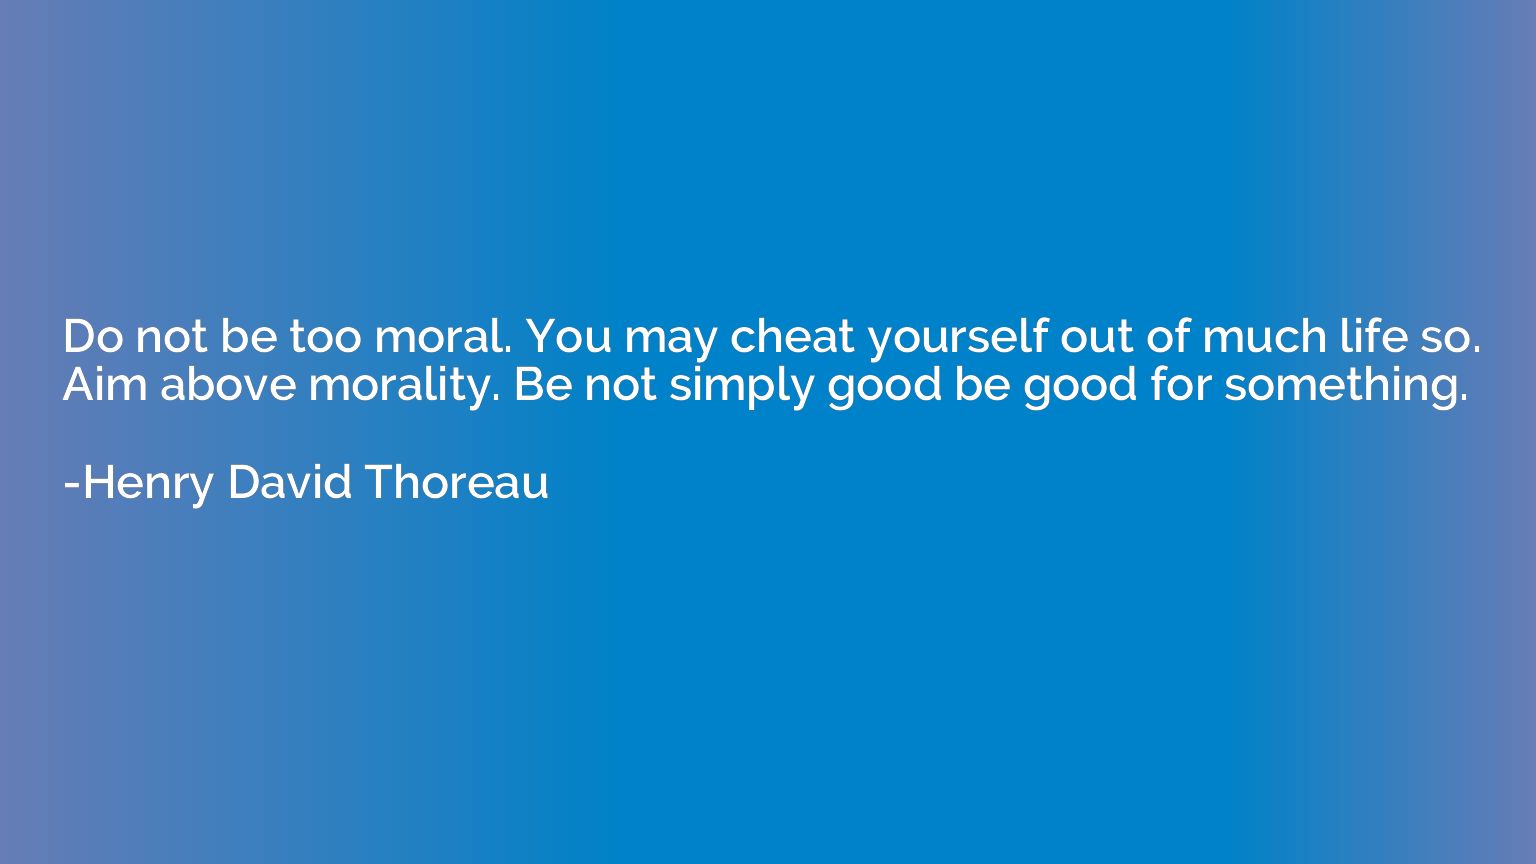 Do not be too moral. You may cheat yourself out of much life